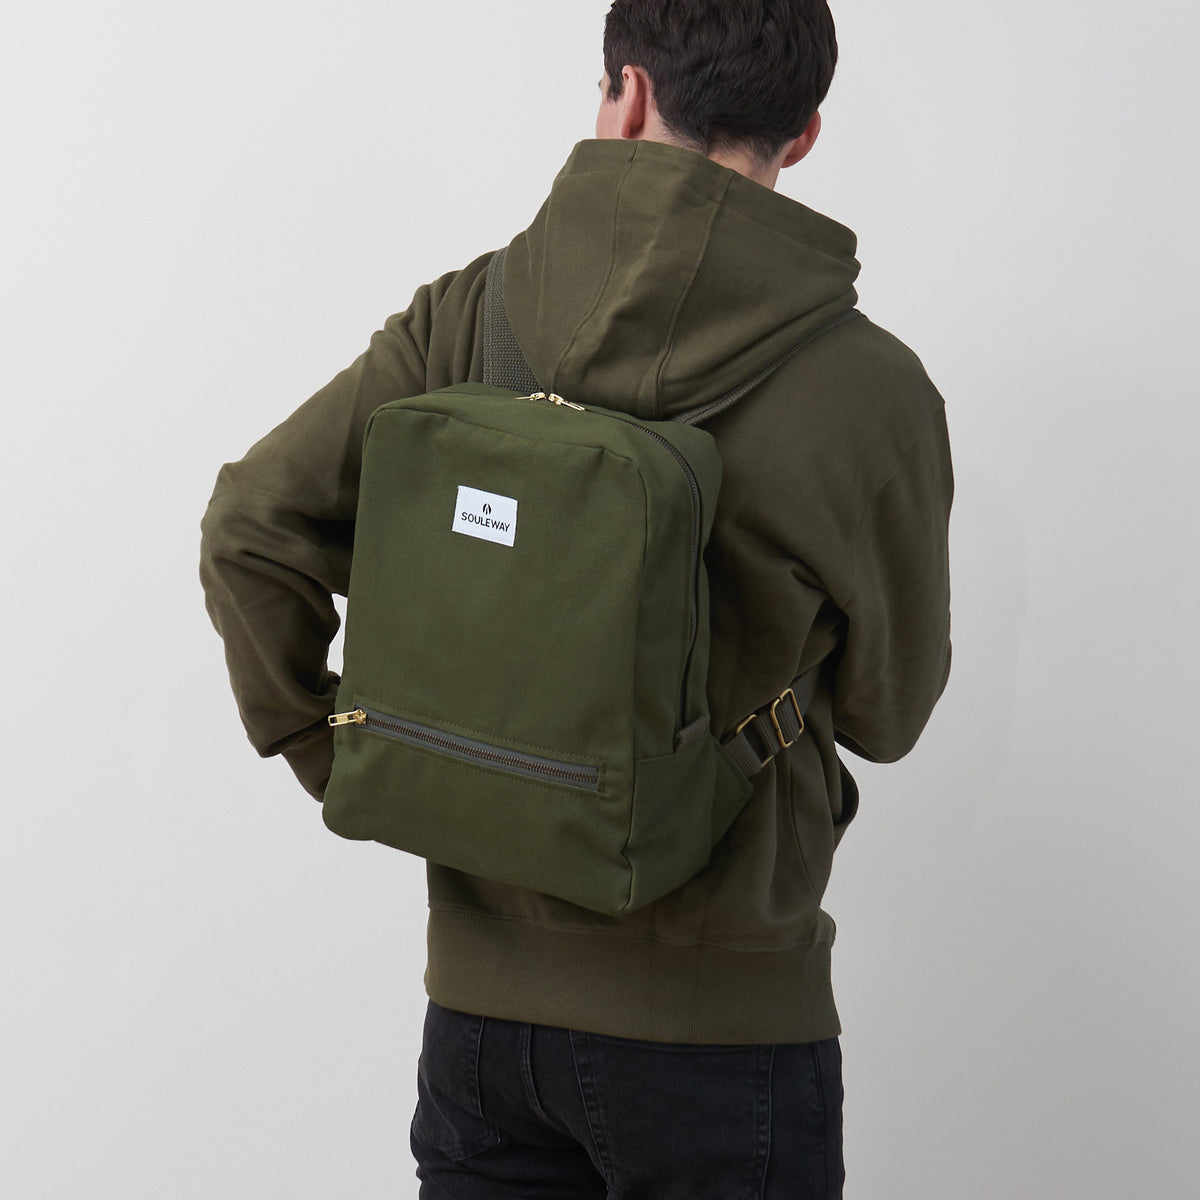 Daypack (imperfect)